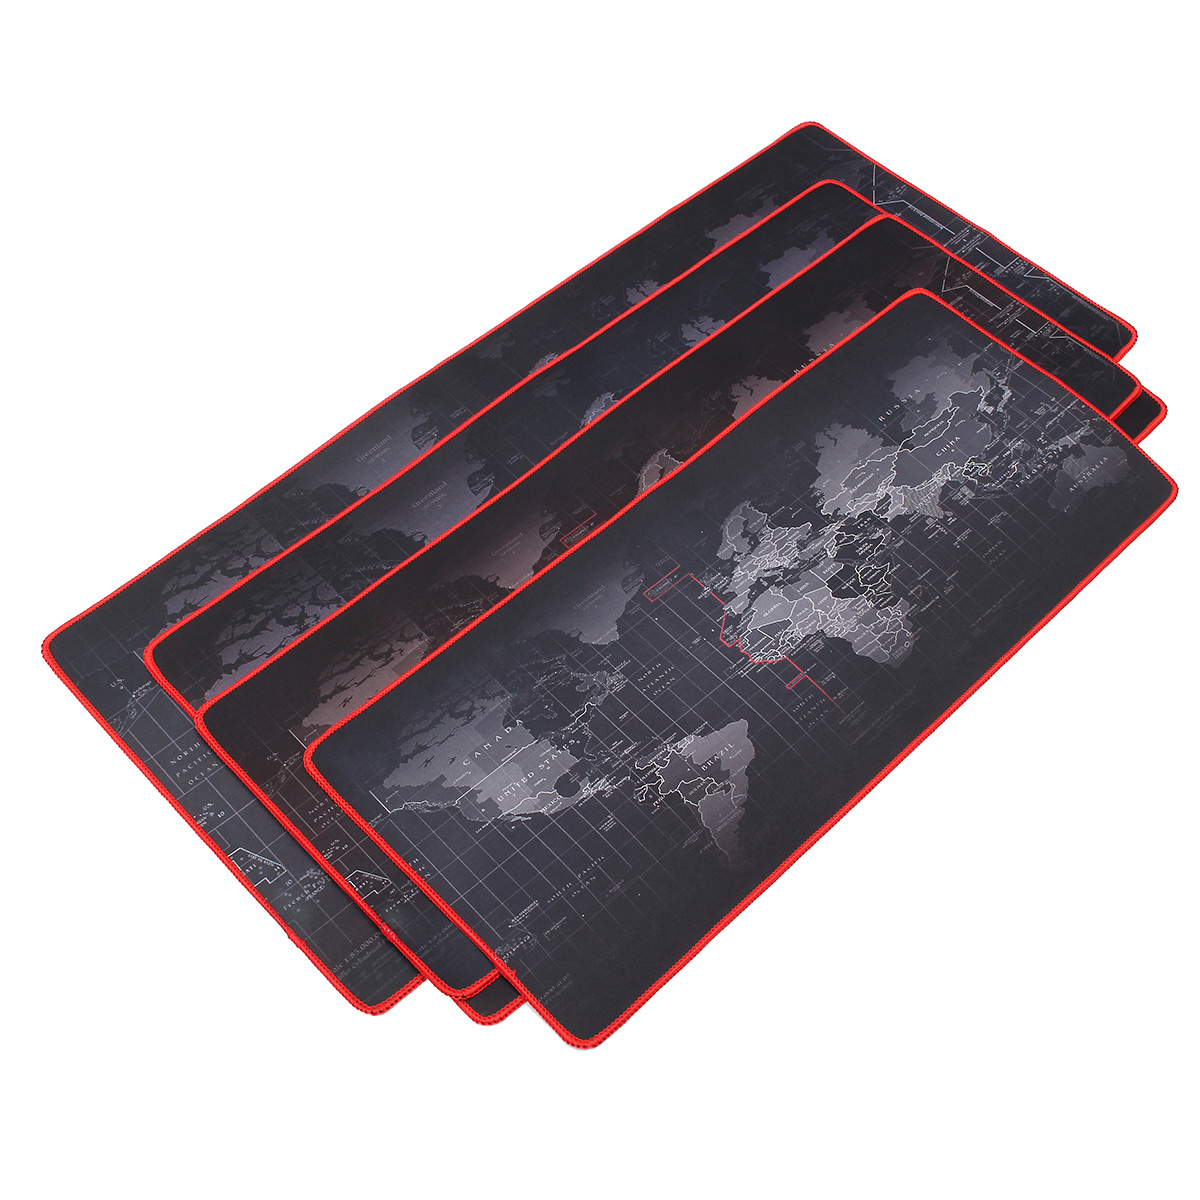 2mm Large Non-Slip World Map Game Mouse Pad Mat with Red Hem For PC Laptop Computer Keyboard 8